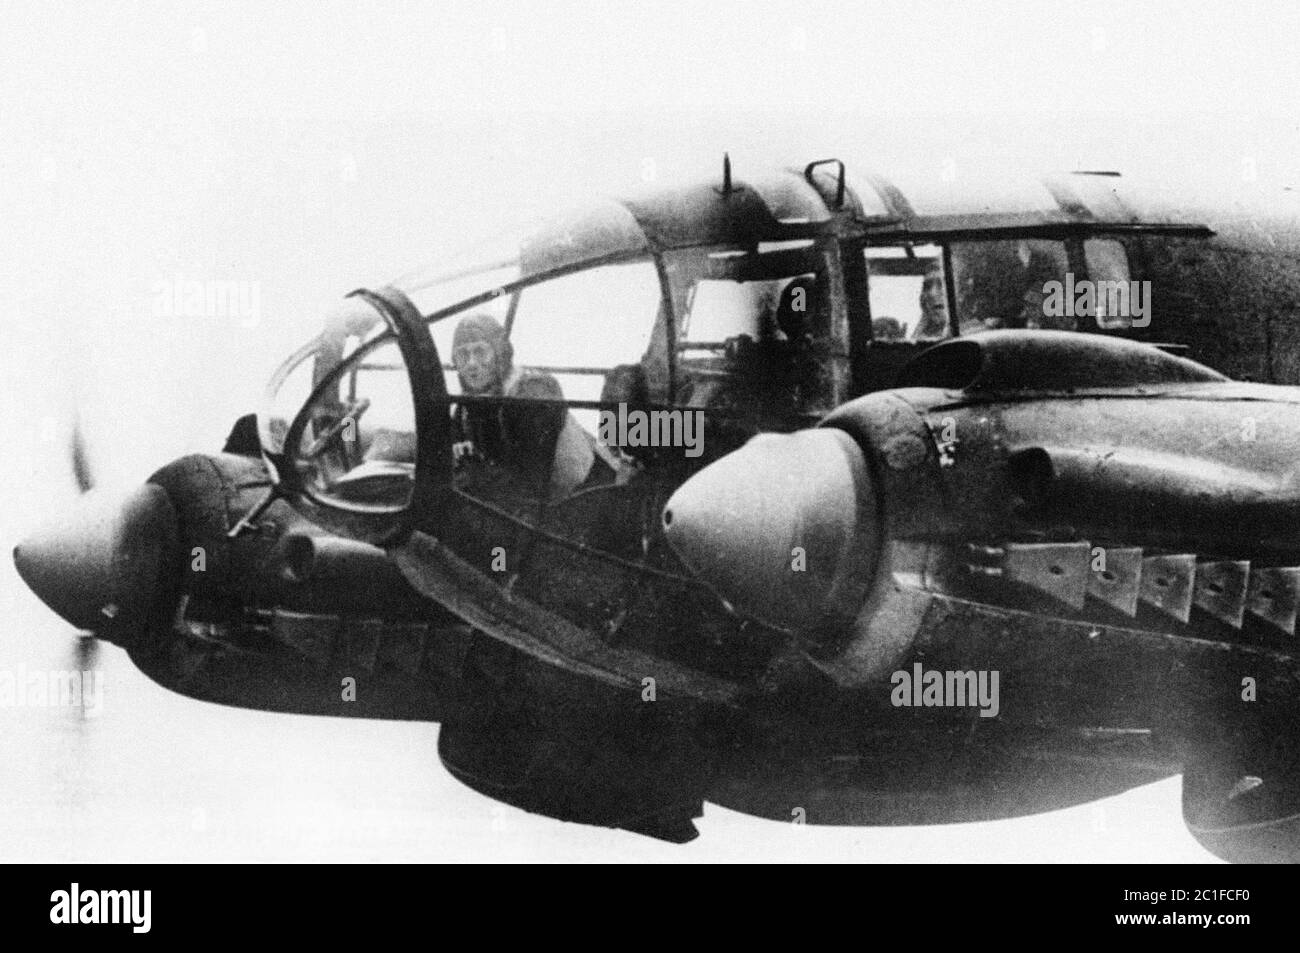 A forward machine gunner sits at his battle position in the nose of a German Heinkel He 111 bomber, while en route to England in November of 1940. Stock Photo